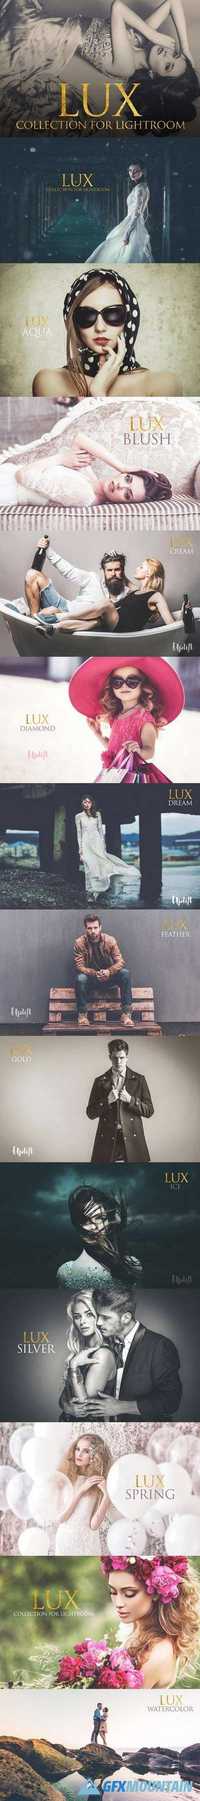 LUX Collection of Lightroom Presets 1120395